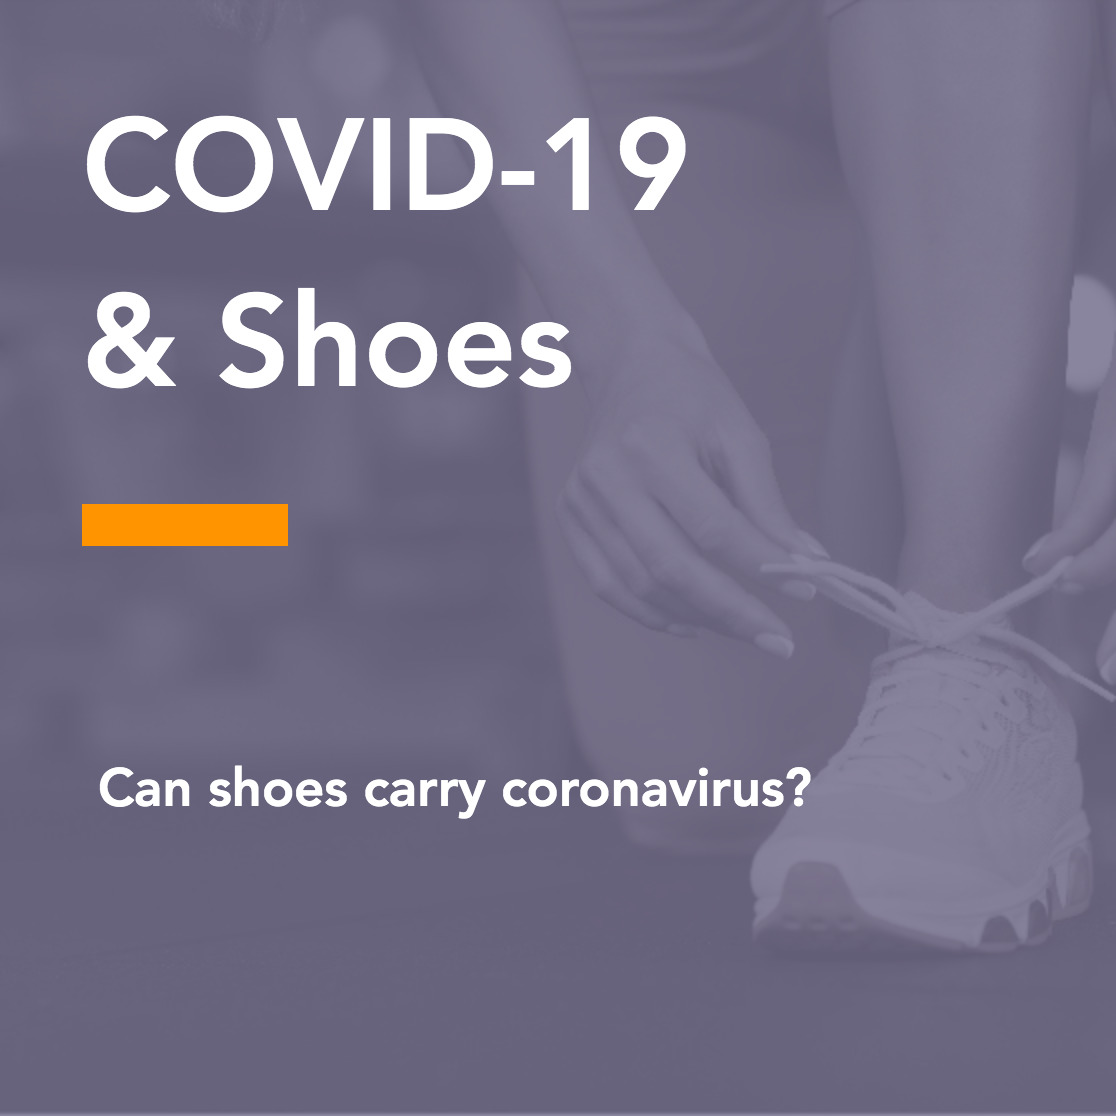 COVID-19 & Shoes